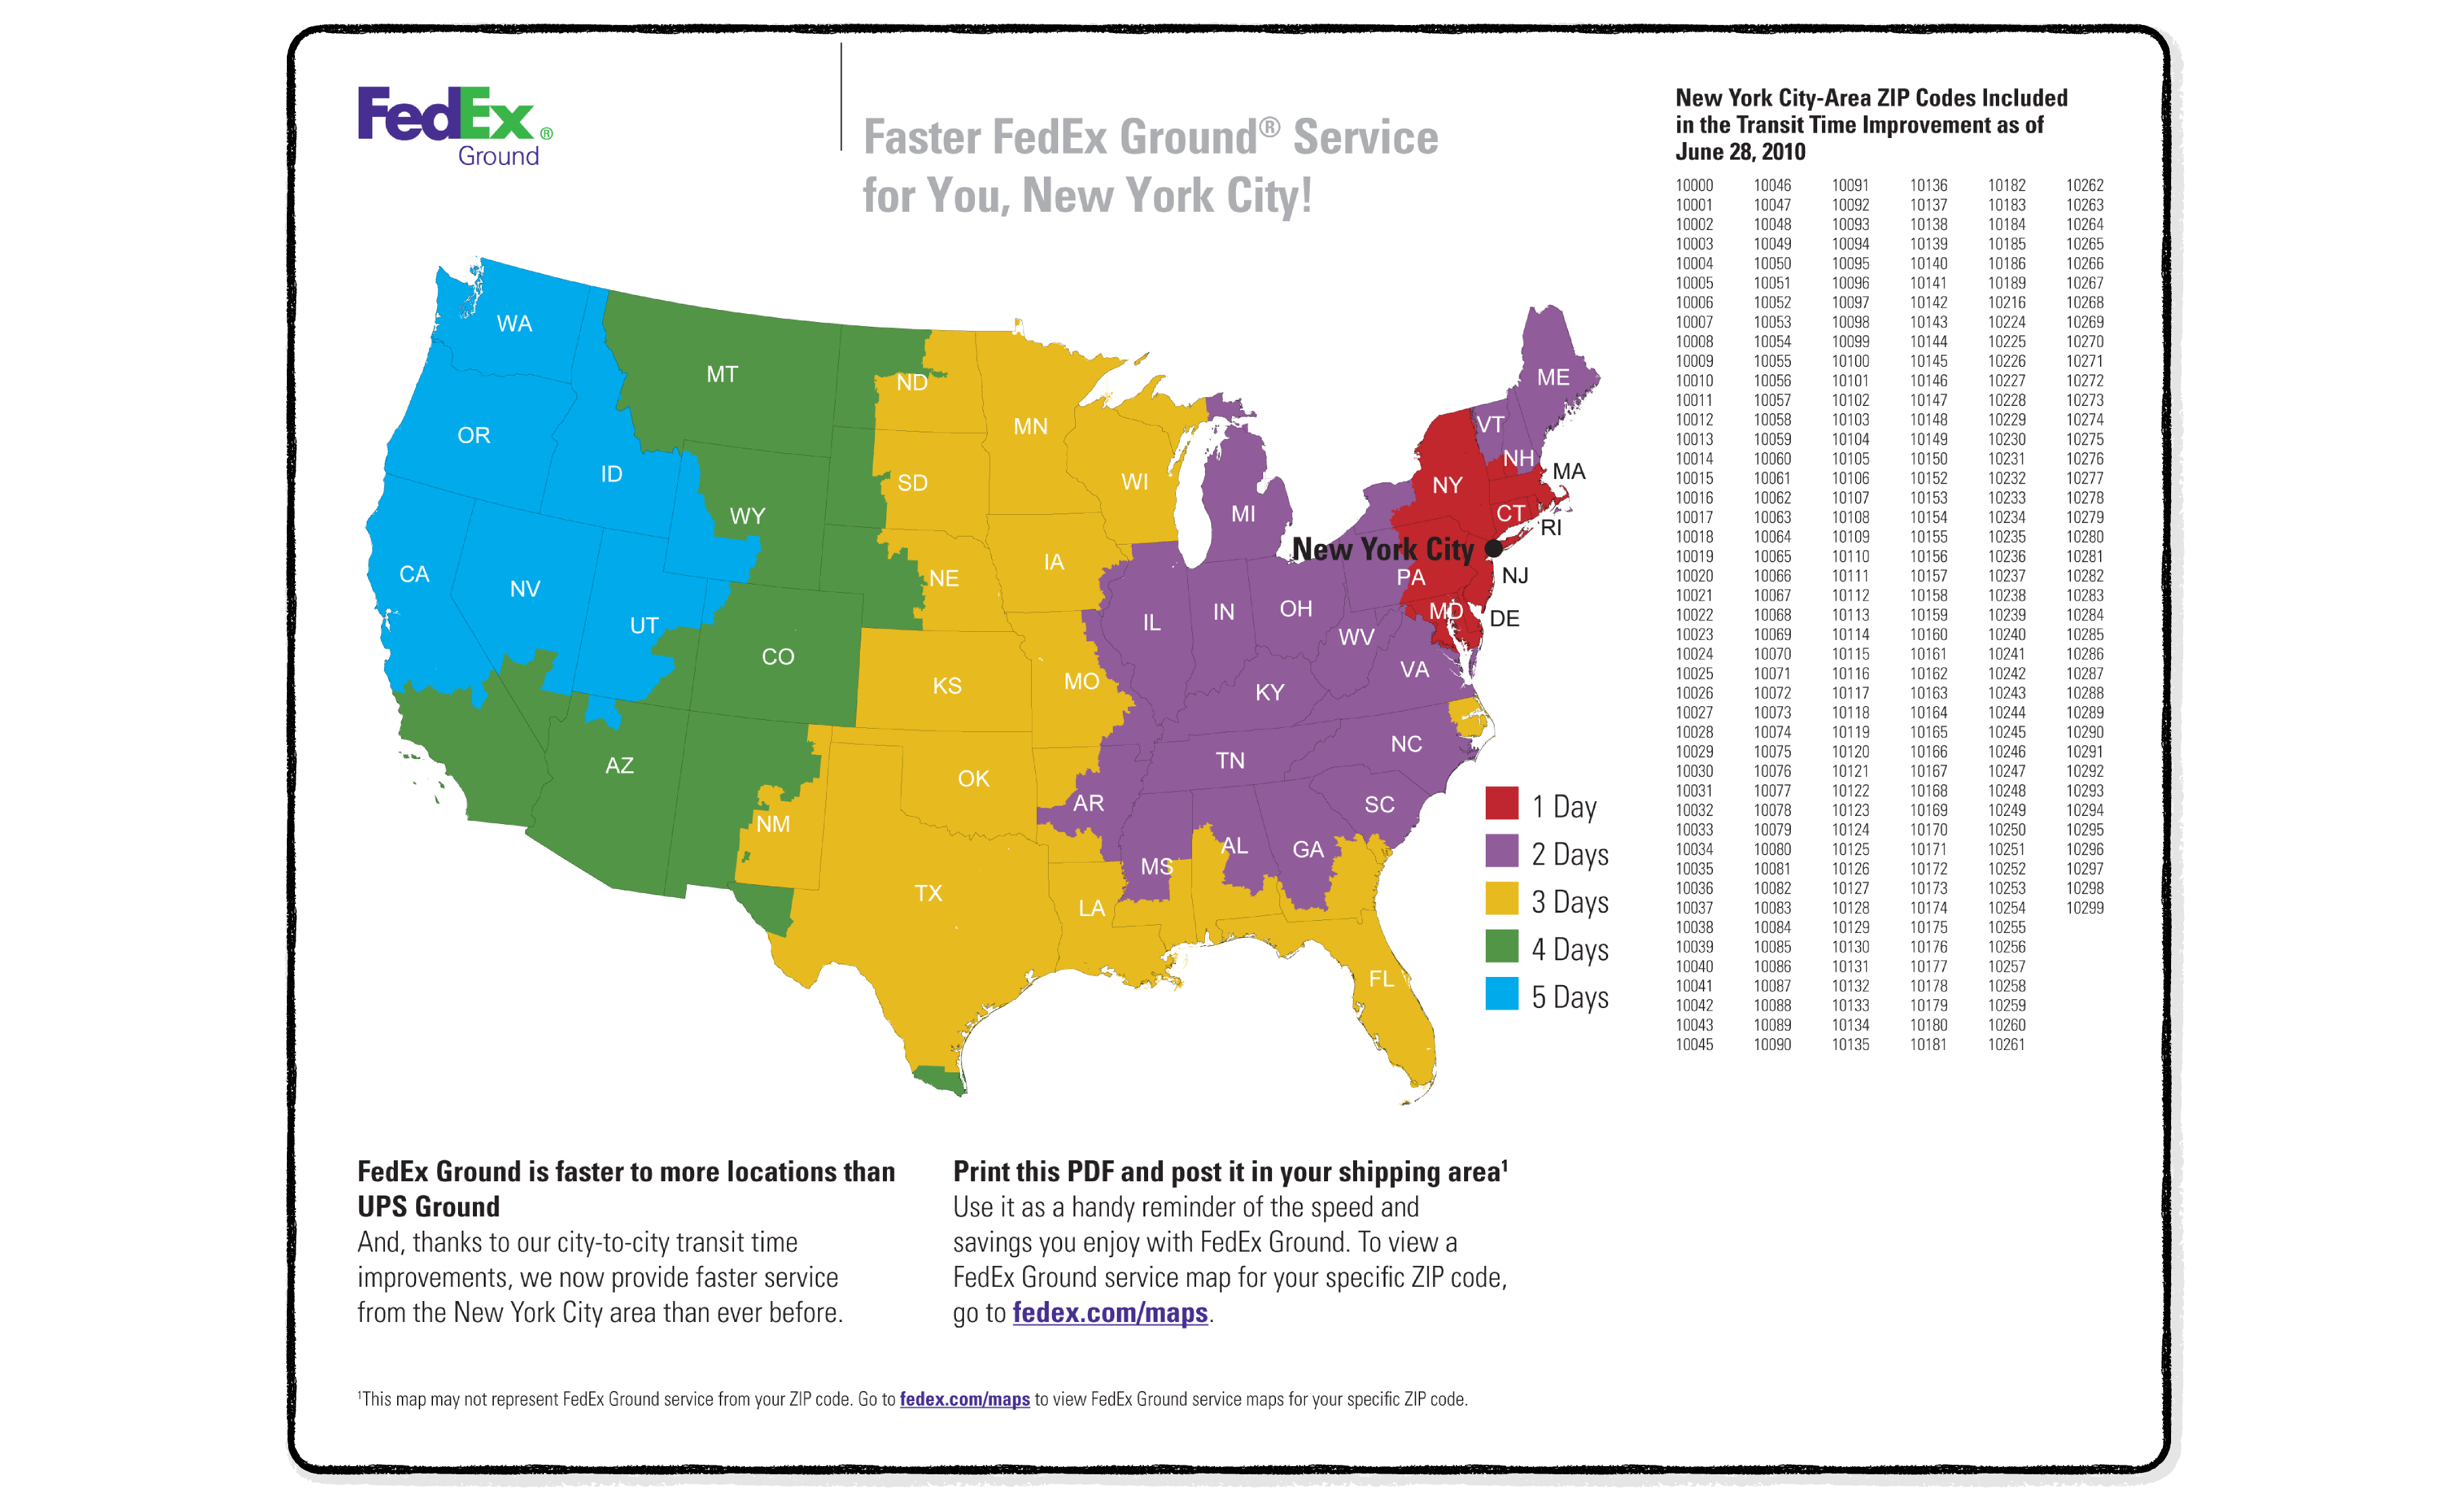 FedEx tracking messages and zones for delivery